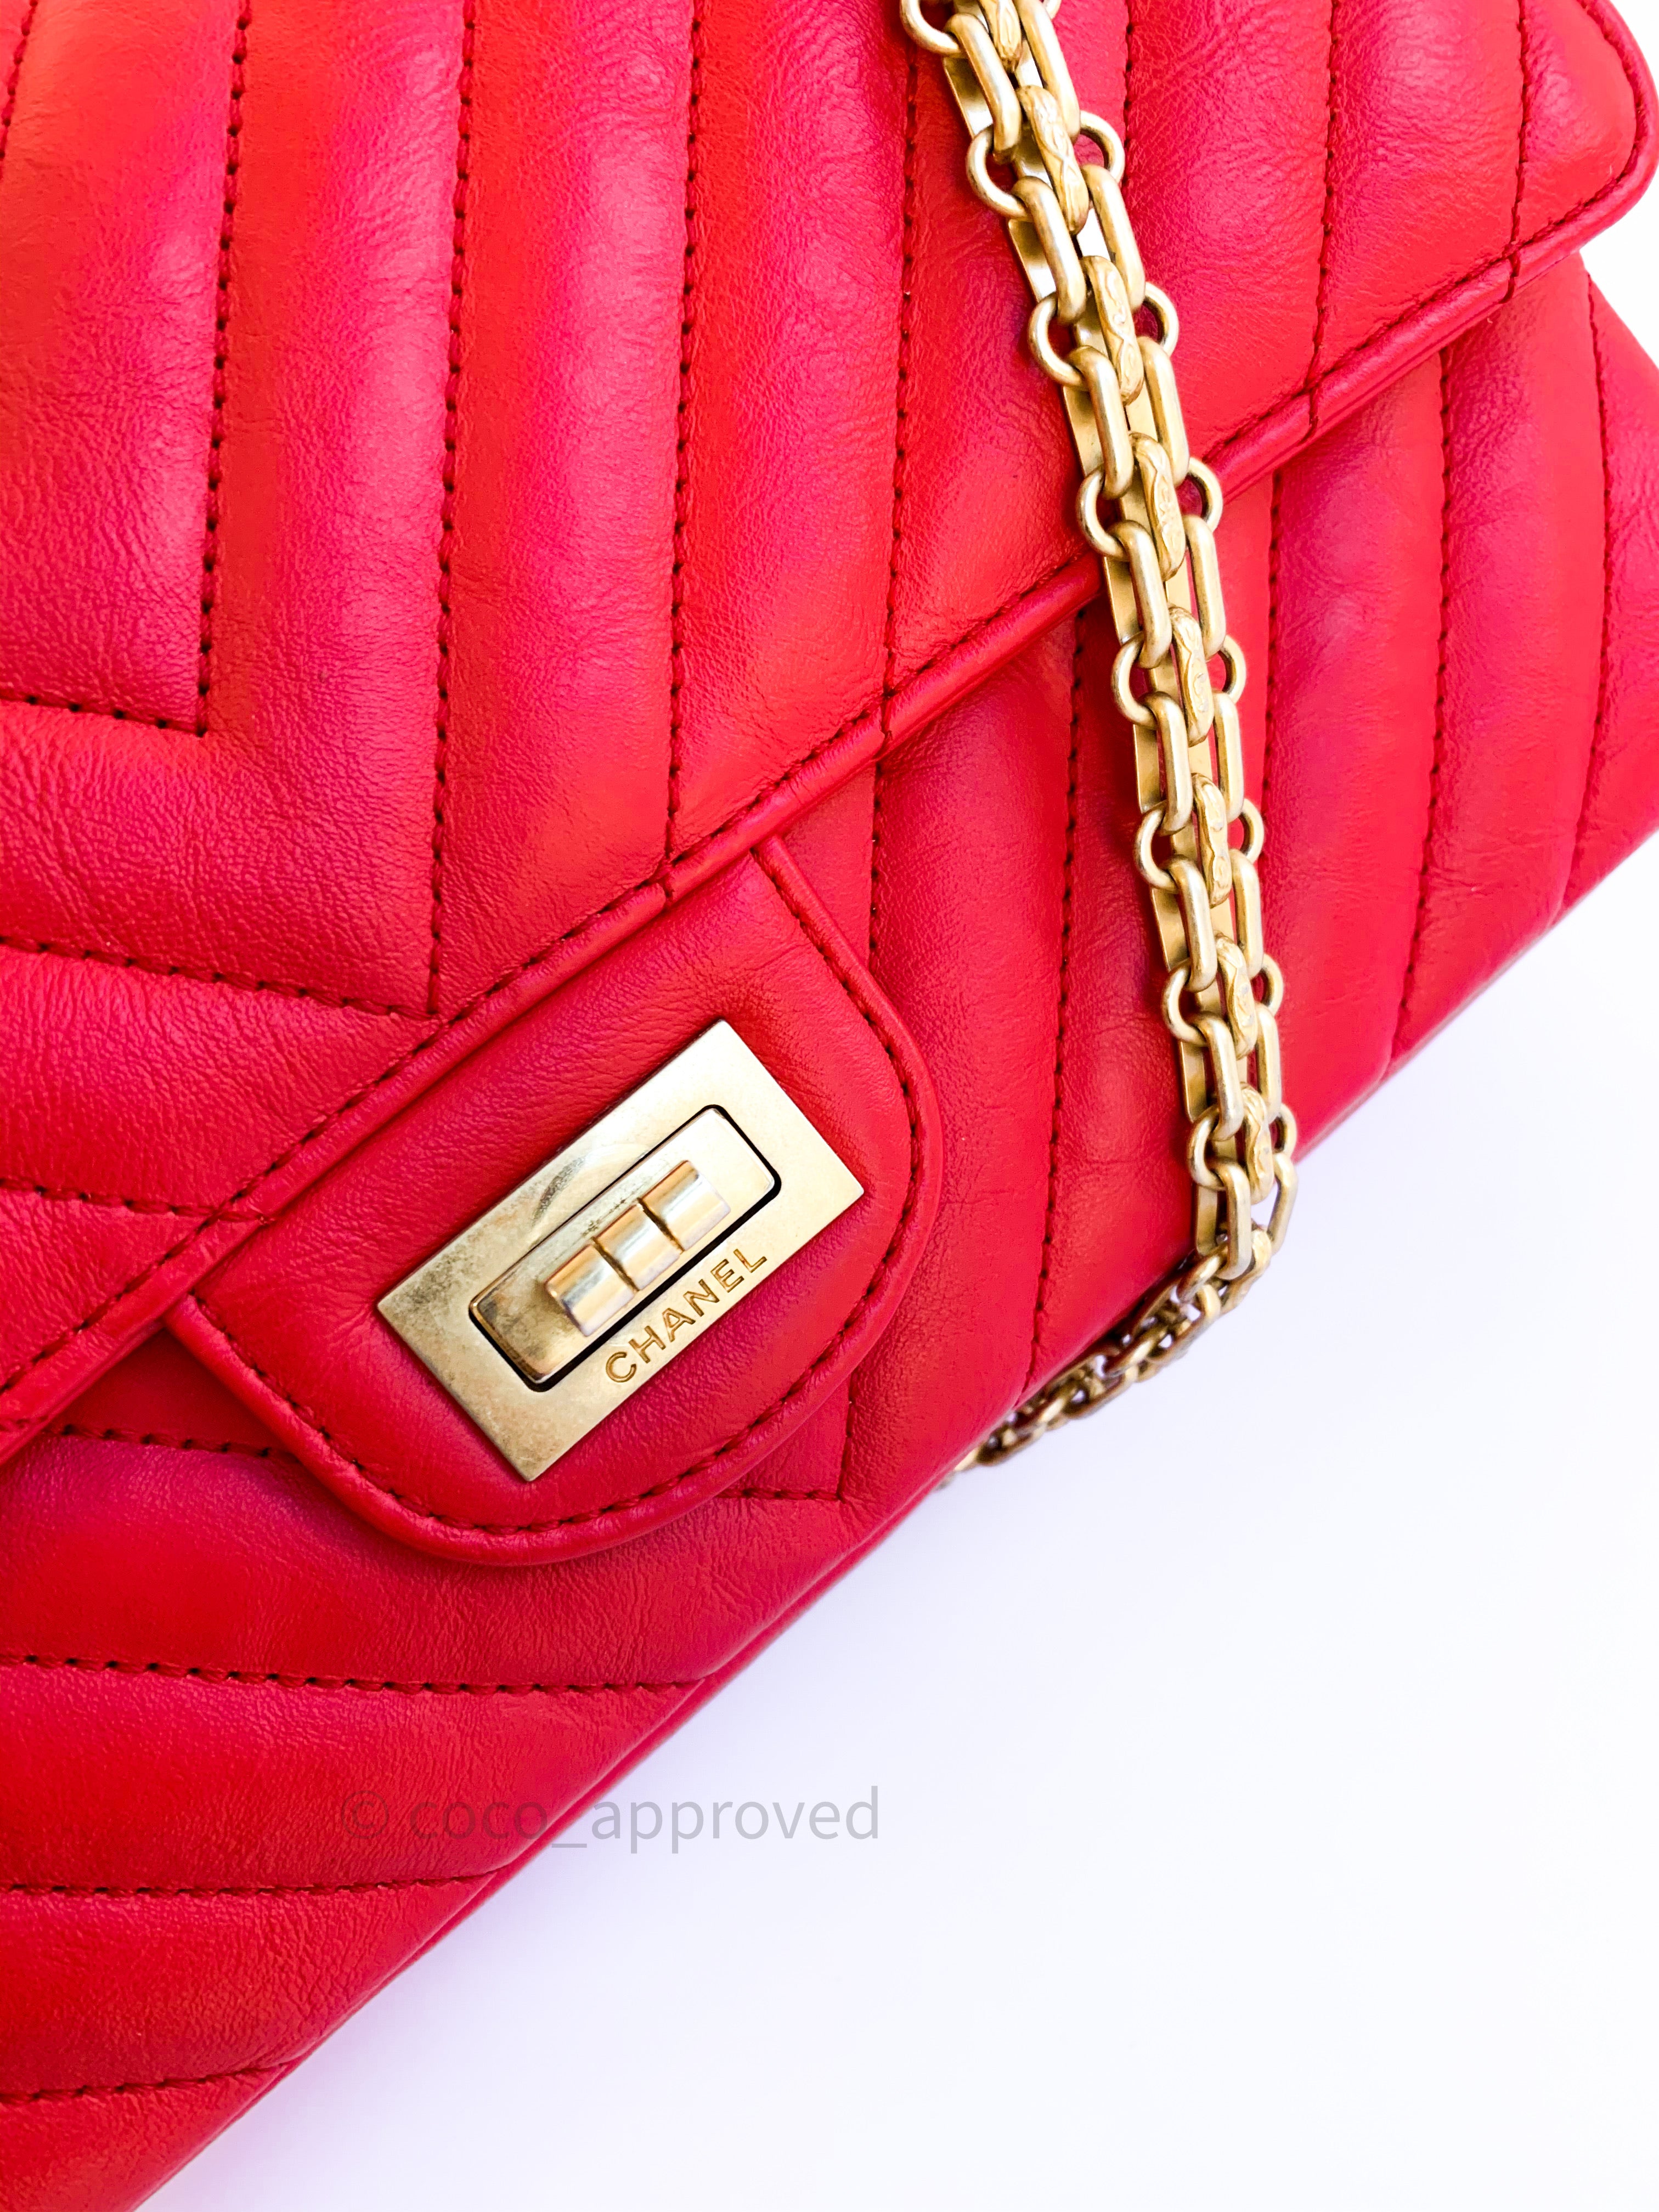 Chanel CHANEL 2.55 Chevron V stitch chain shoulder bag leather red A37586  gold metal fittings Bag